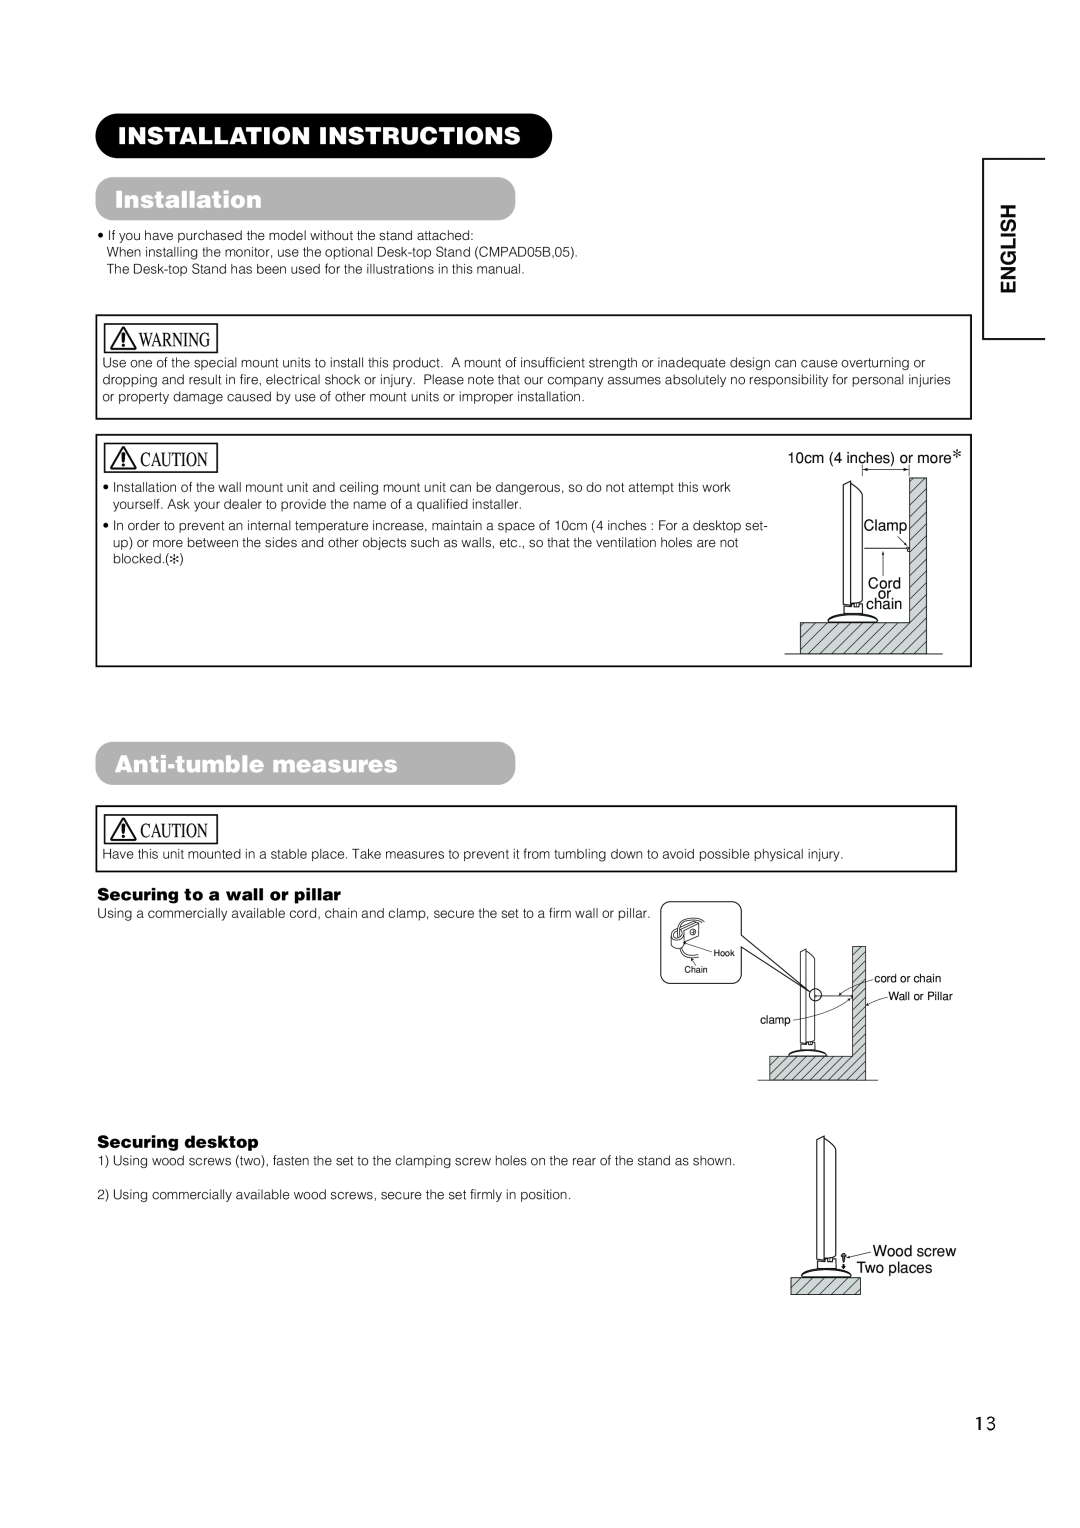 Hitachi PW1A INSTALLATION INSTRUCTIONS Installation, Anti-tumble measures, English, Securing to a wall or pillar 